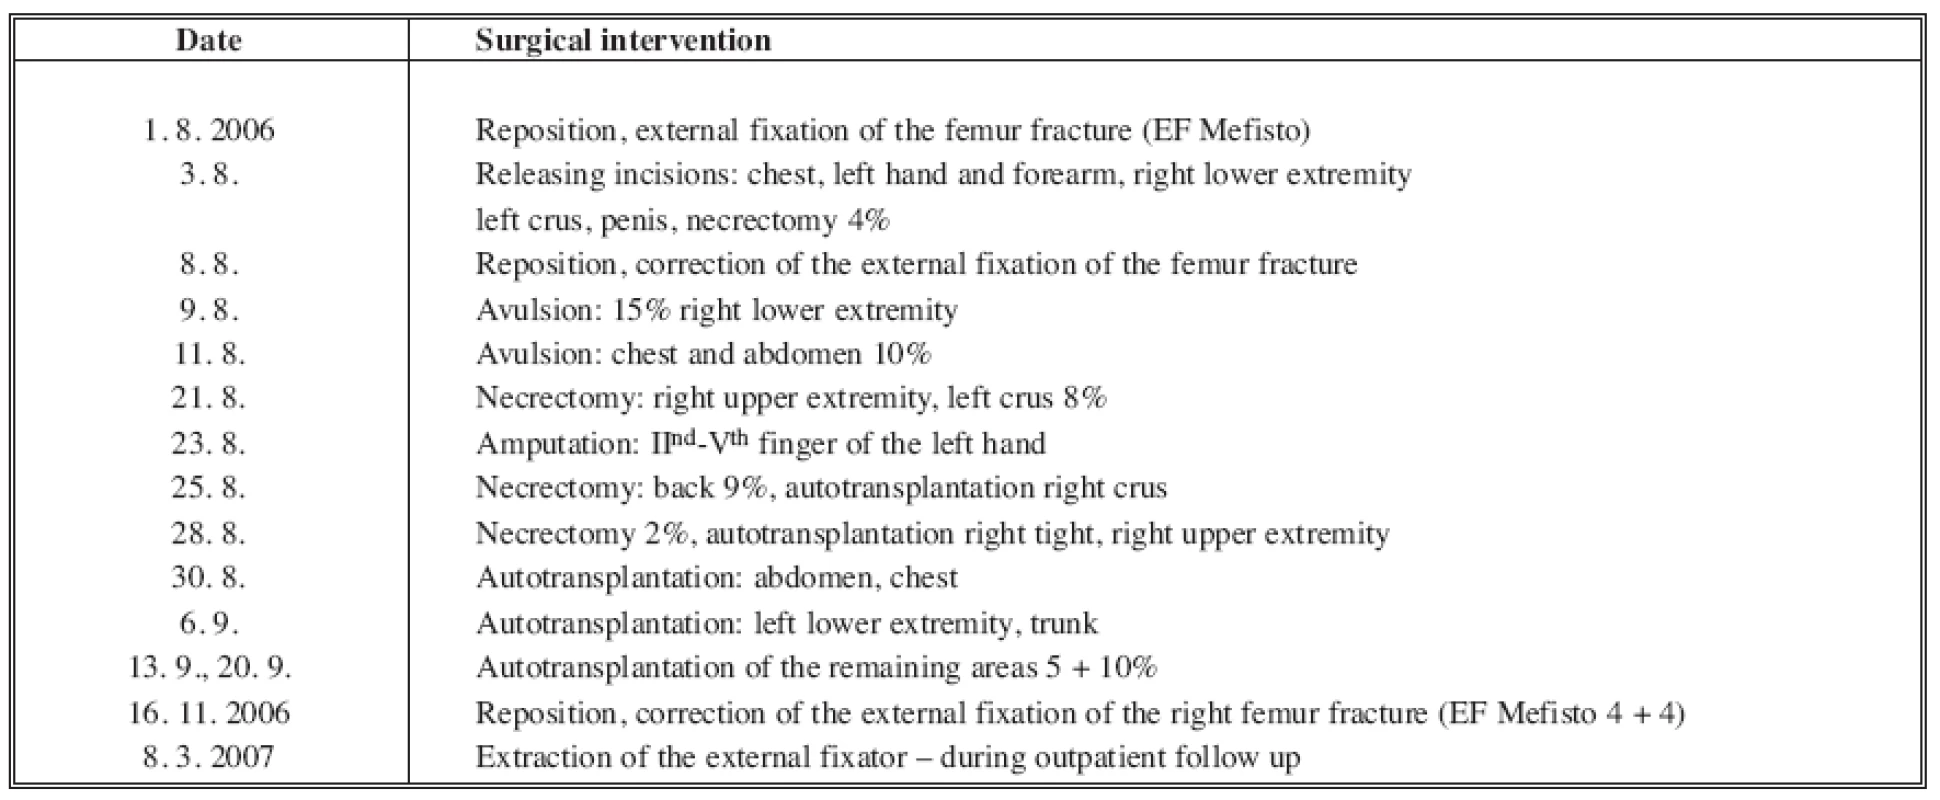 Abstract of main surgical interventions